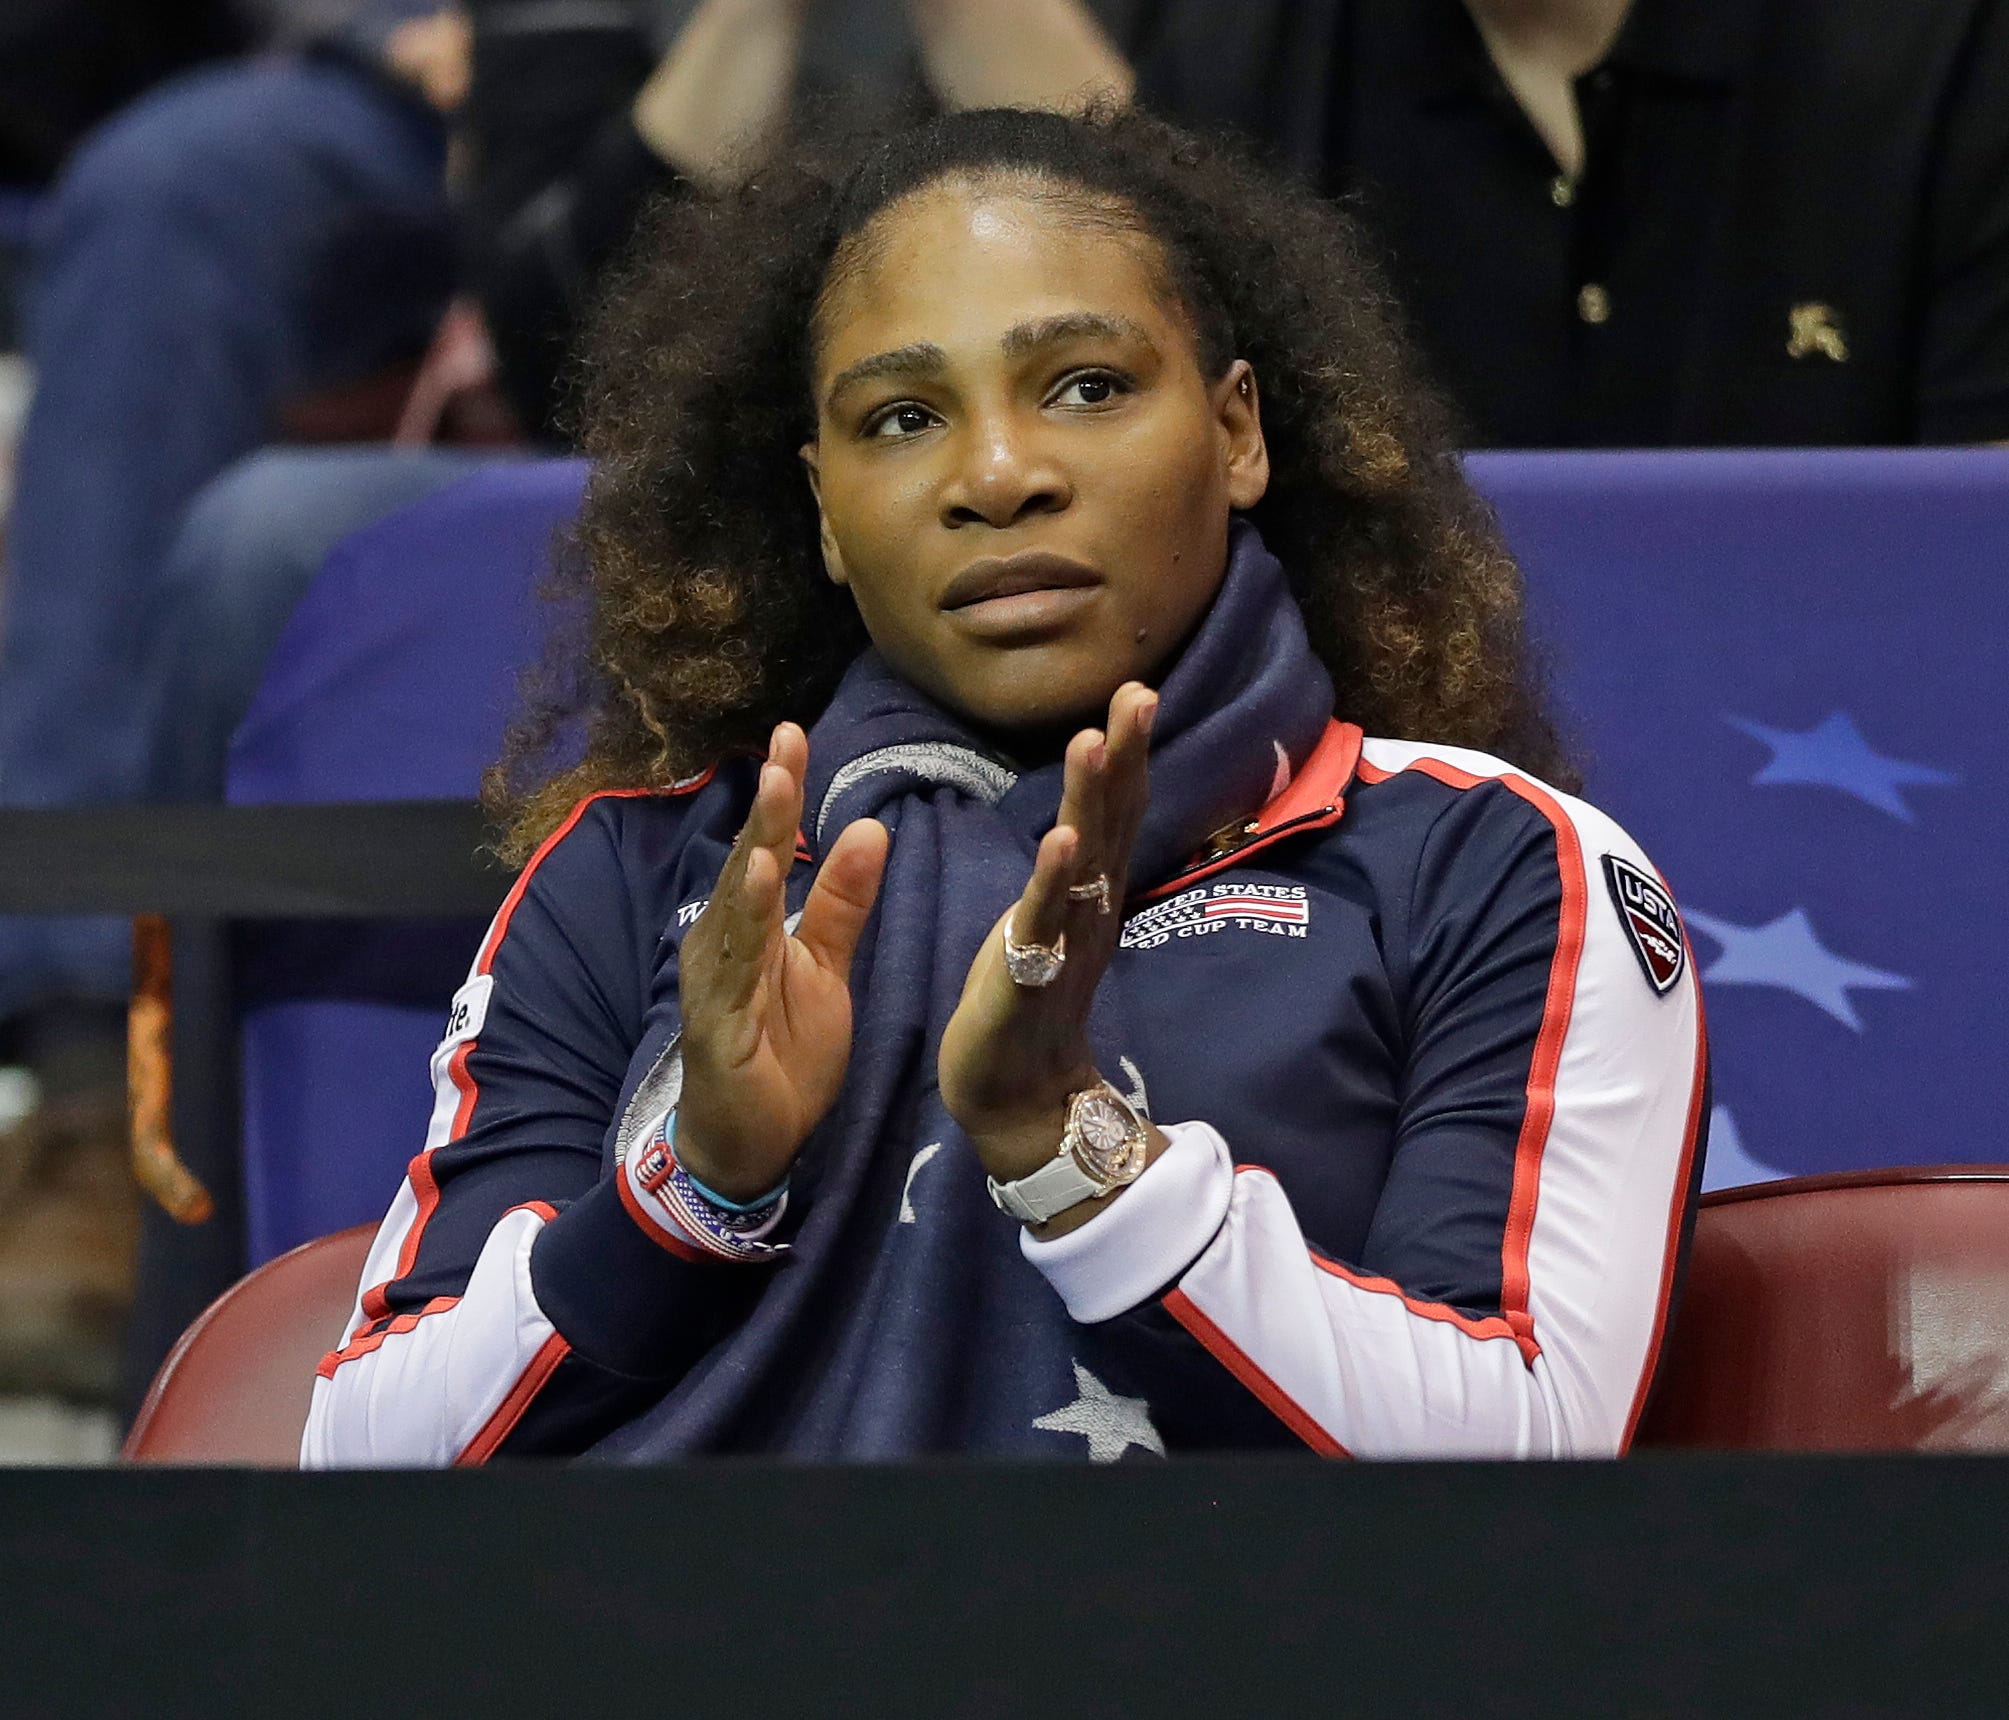 USA's Serena Williams cheers on Venus Williams against Netherlands' Arantxa Rus during a match in the first round of Fed Cup tennis competition in Asheville, N.C., Saturday, Feb. 10, 2018. (AP Photo/Chuck Burton) ORG XMIT: NCCB112